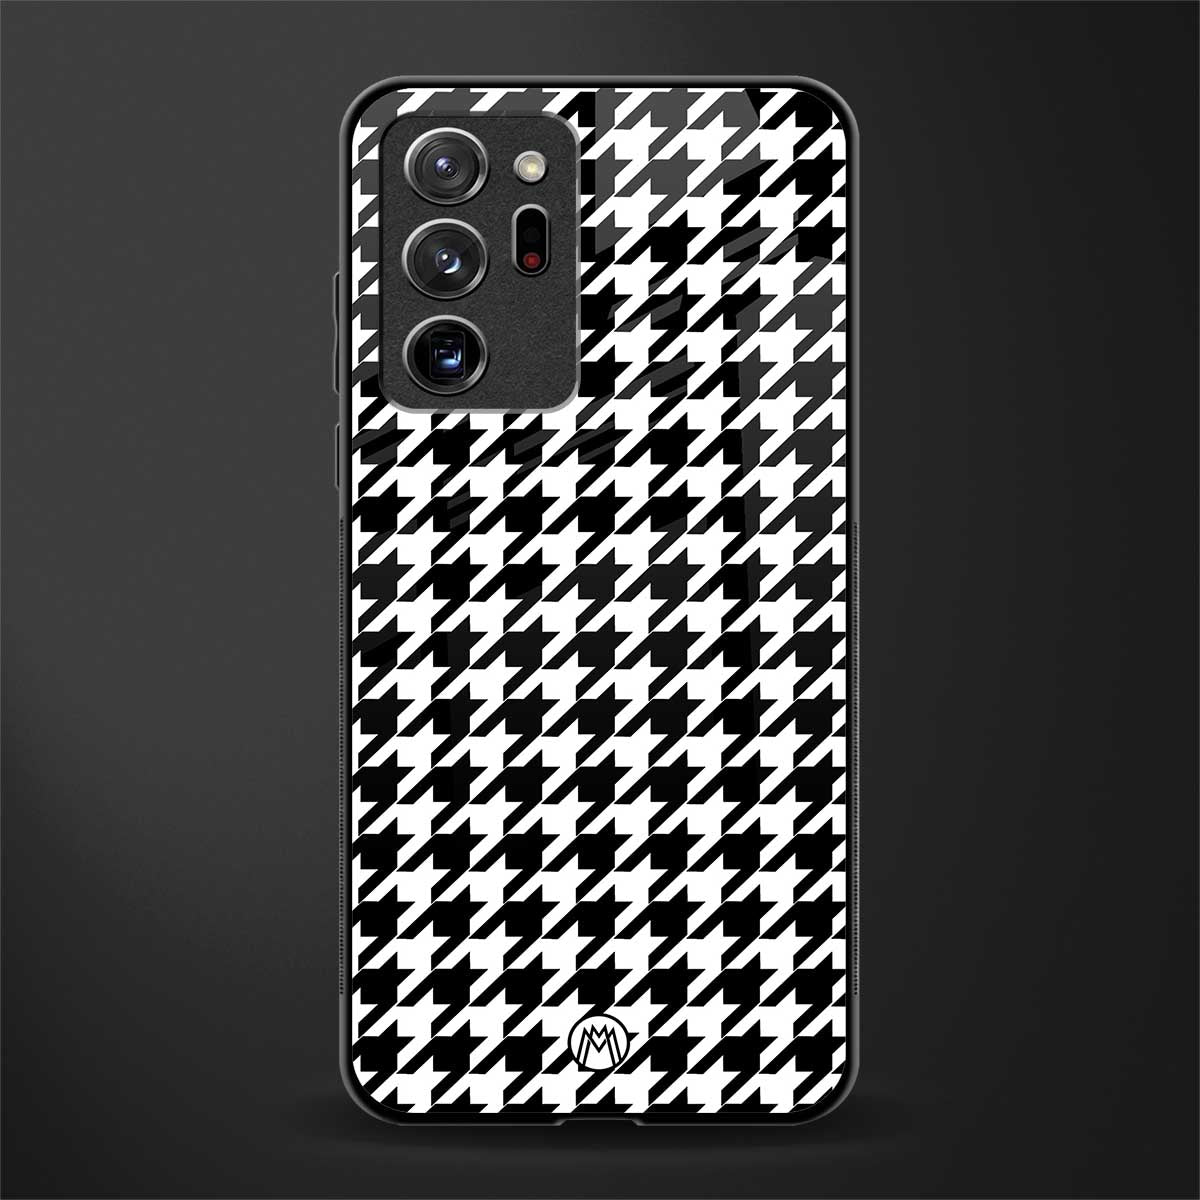 houndstooth classic glass case for samsung galaxy note 20 ultra 5g image